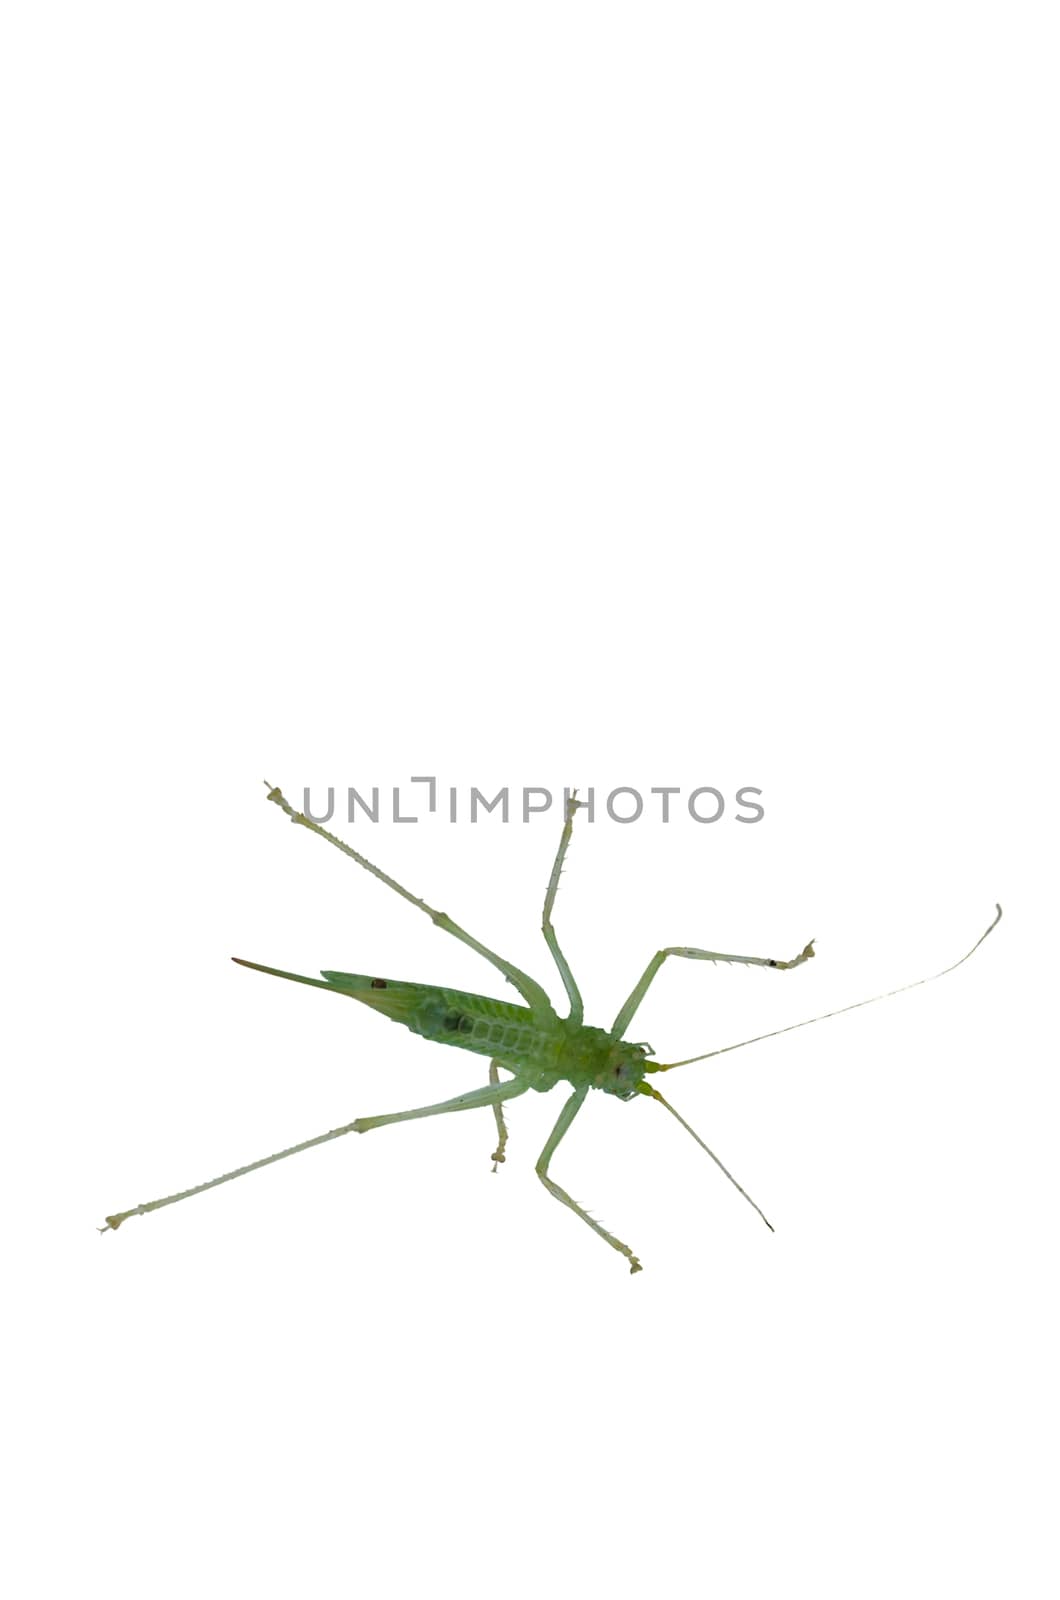 Young little insect, grasshopper photographed from below through a glass window.